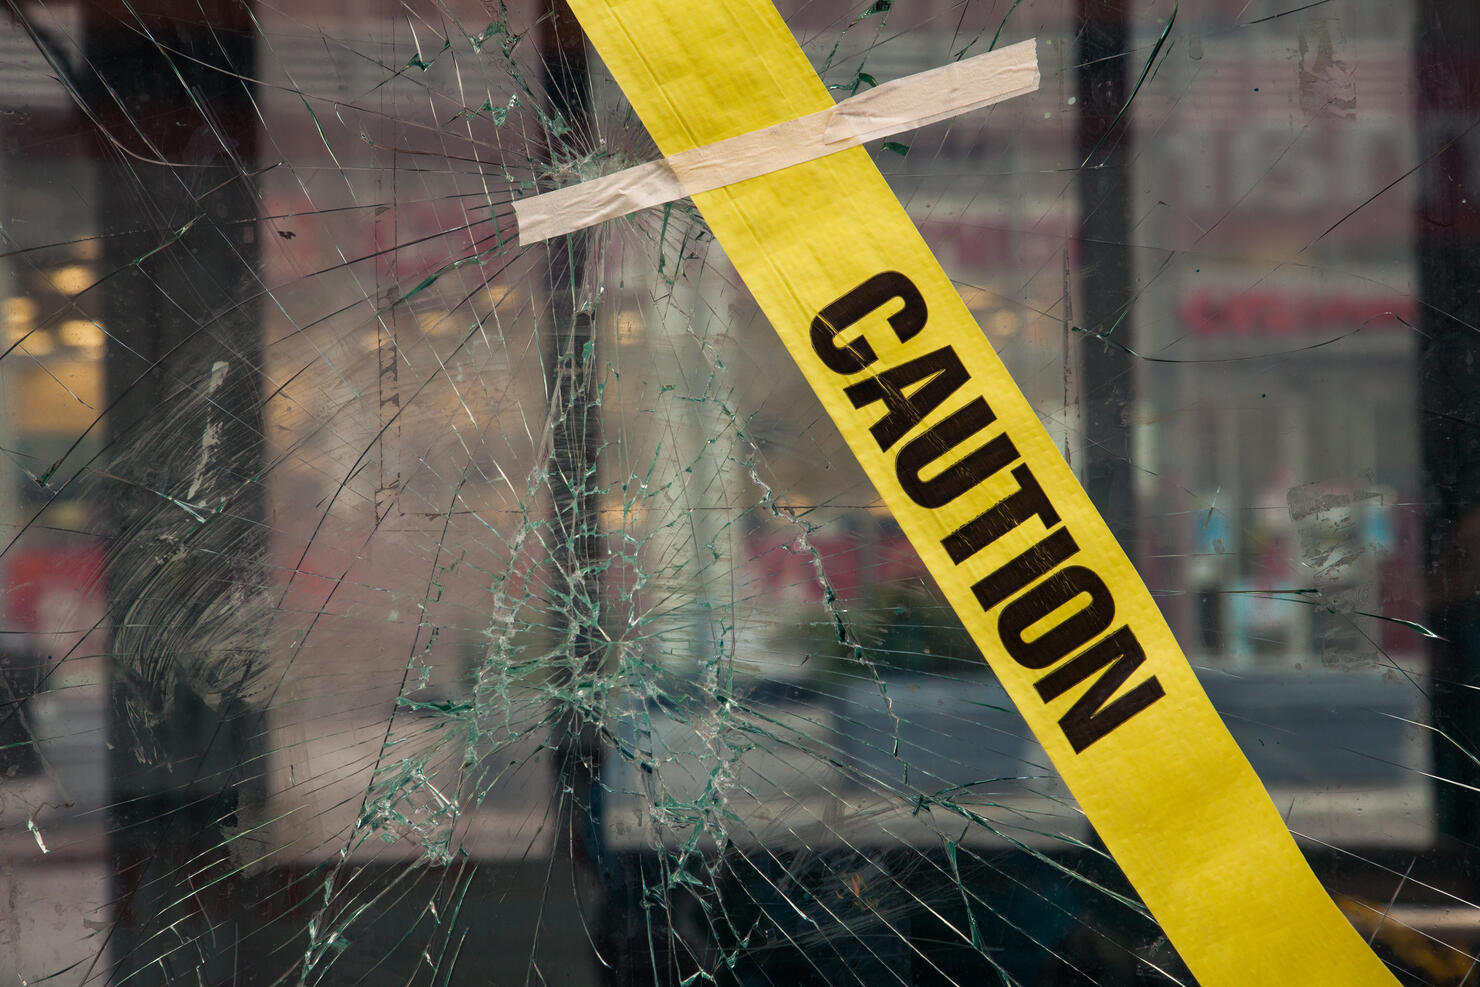 Broken window with glued yellow tape with "CAUTION" lettering